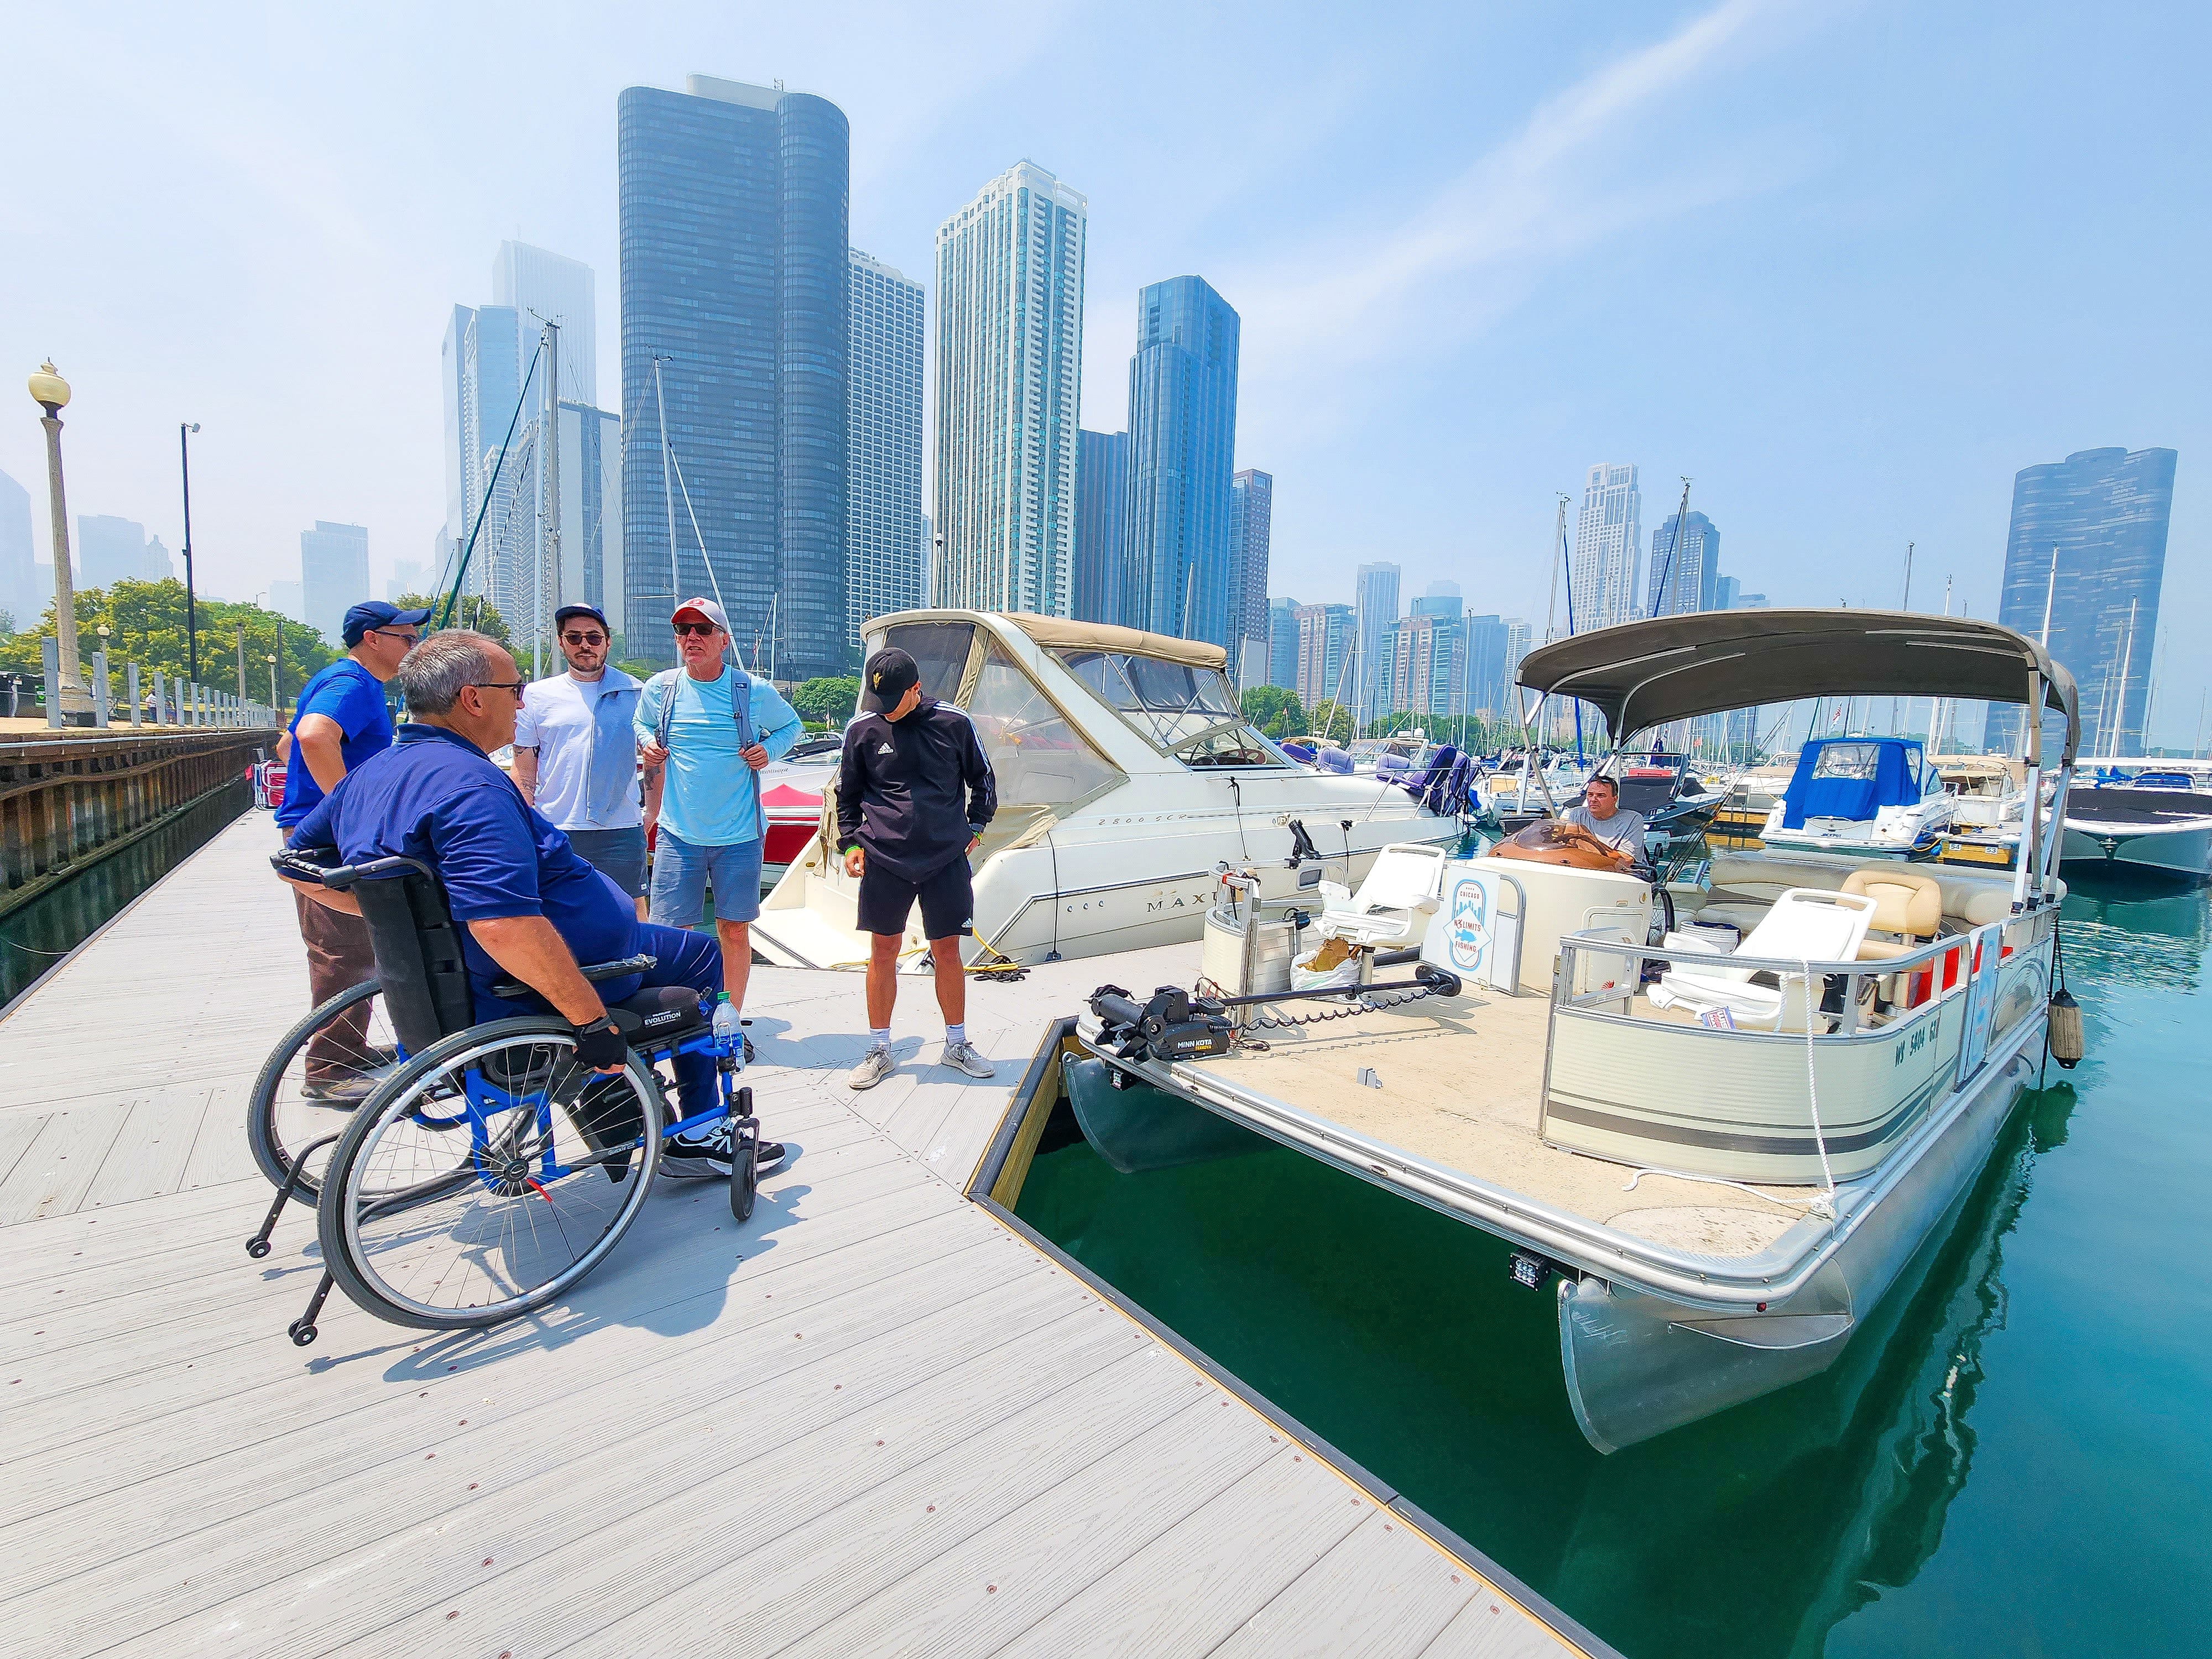 Dave Hanson captains the wheelchair accessible boat down the Chicago River